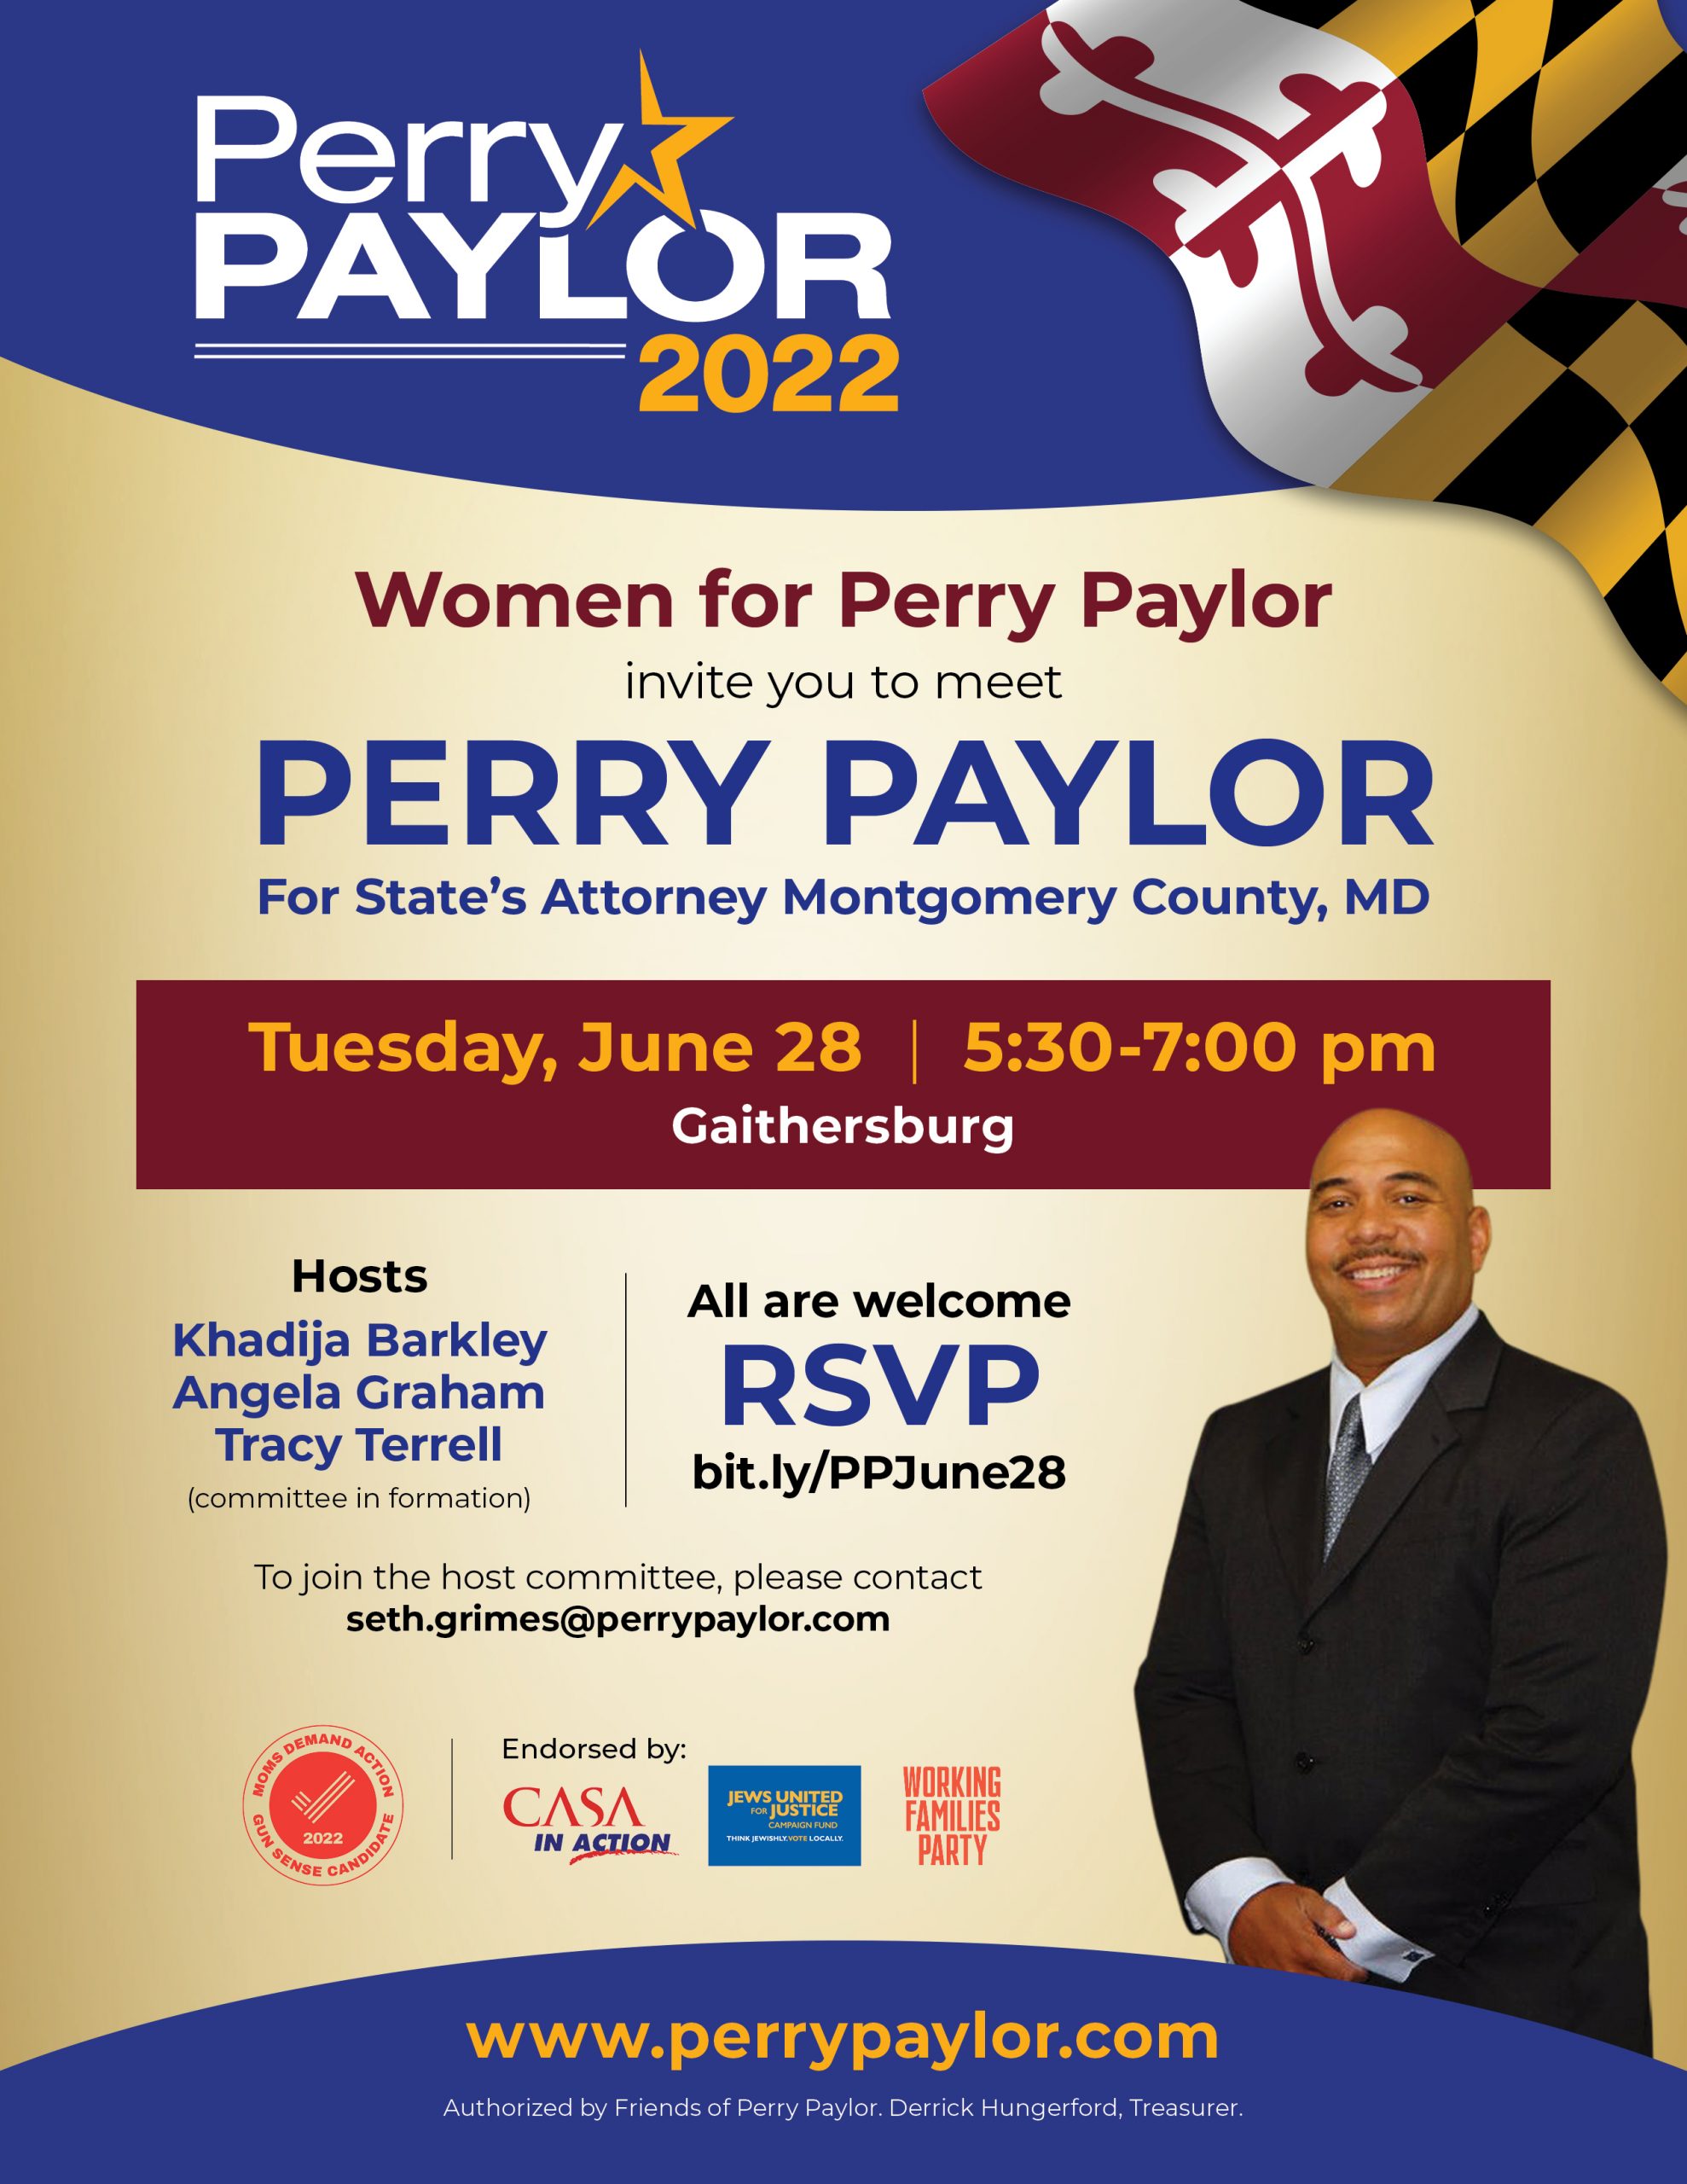 Women for Perry Flyer